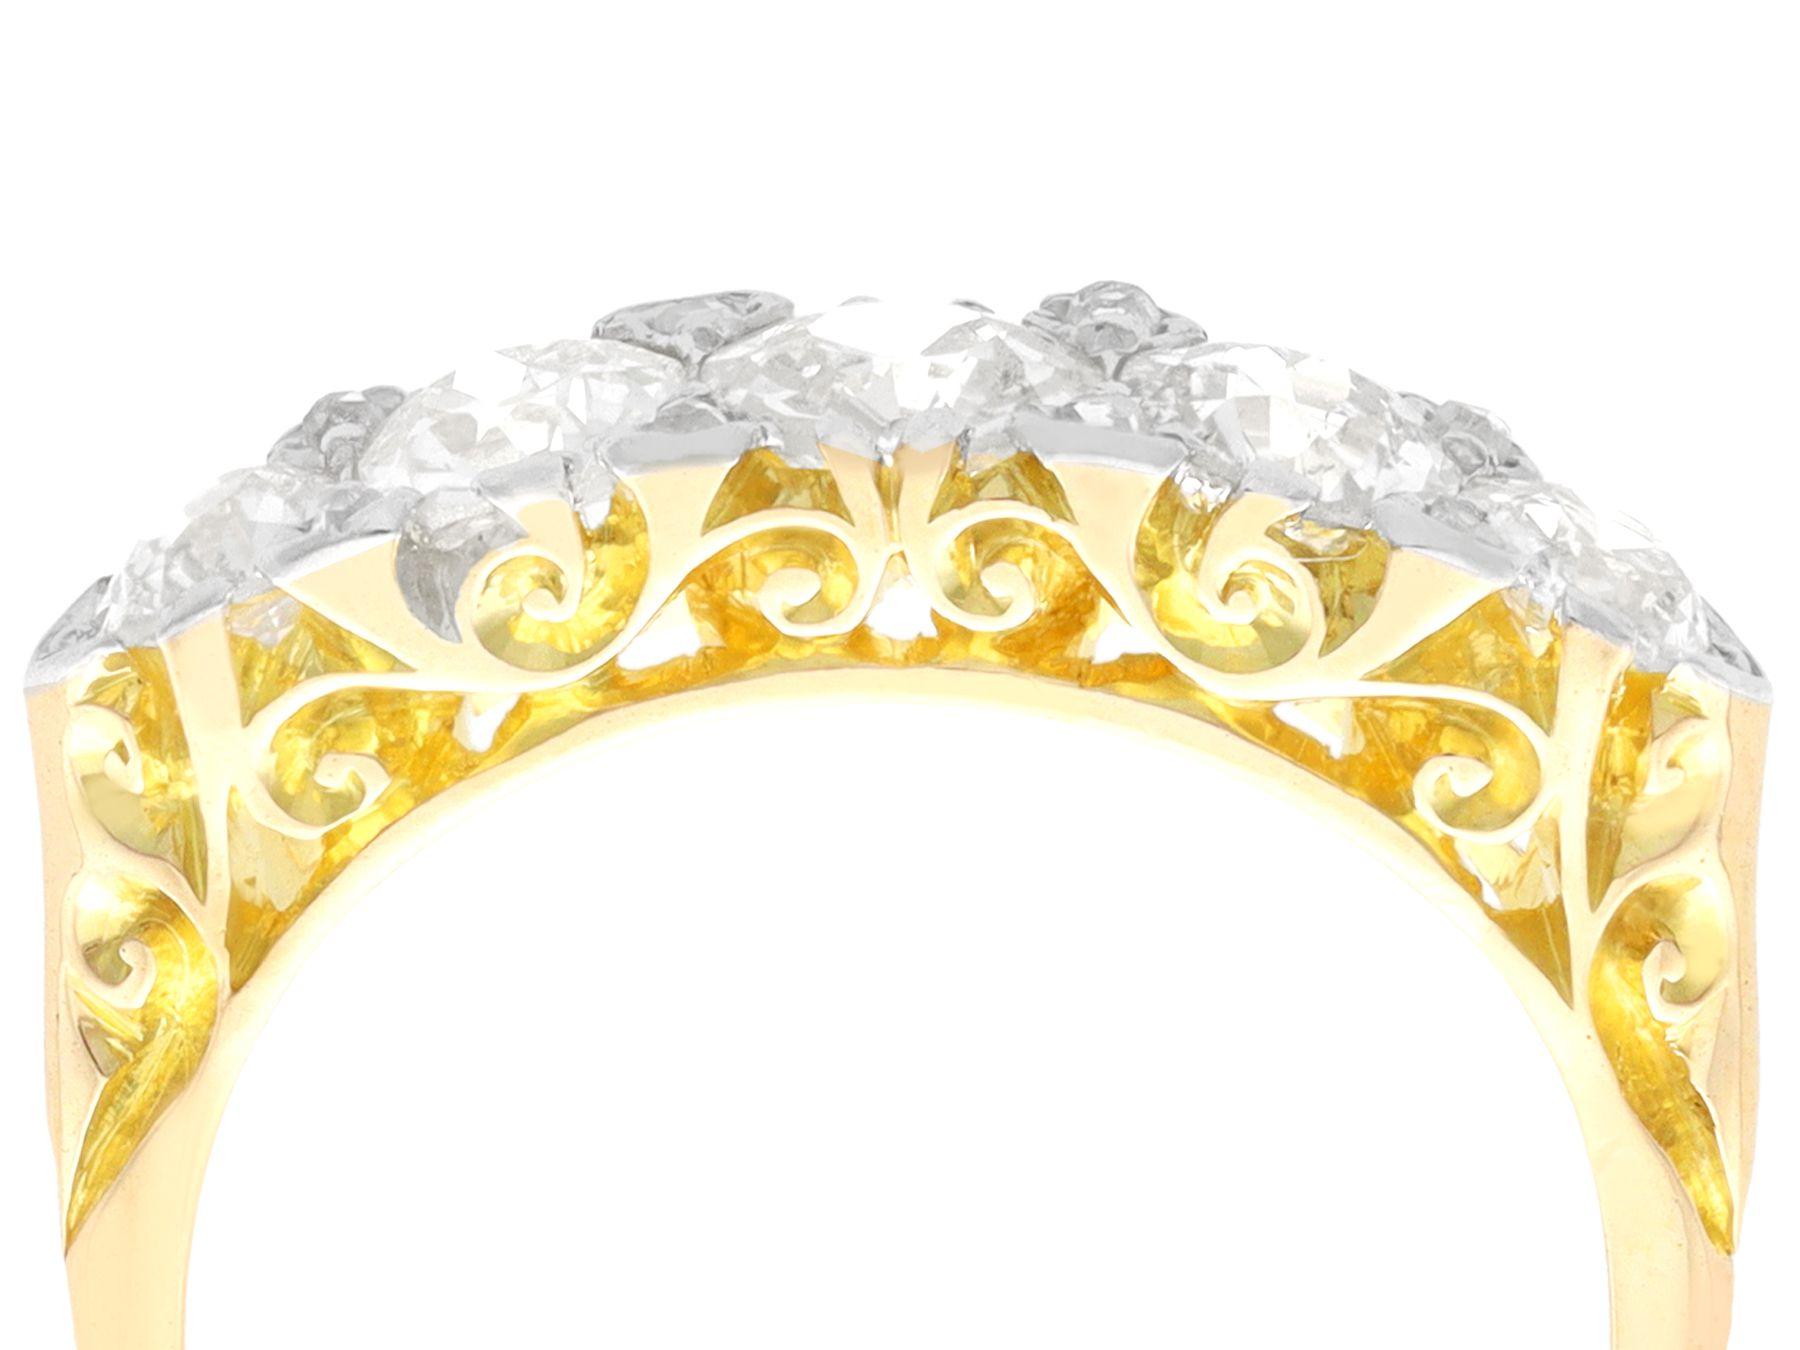 A stunning, fine and impressive 1.83 carat diamond, 18 karat yellow gold and platinum five stone ring; part of our diverse antique jewellery and estate jewelry collections.

This fine and impressive gold five stone diamond ring has been crafted in